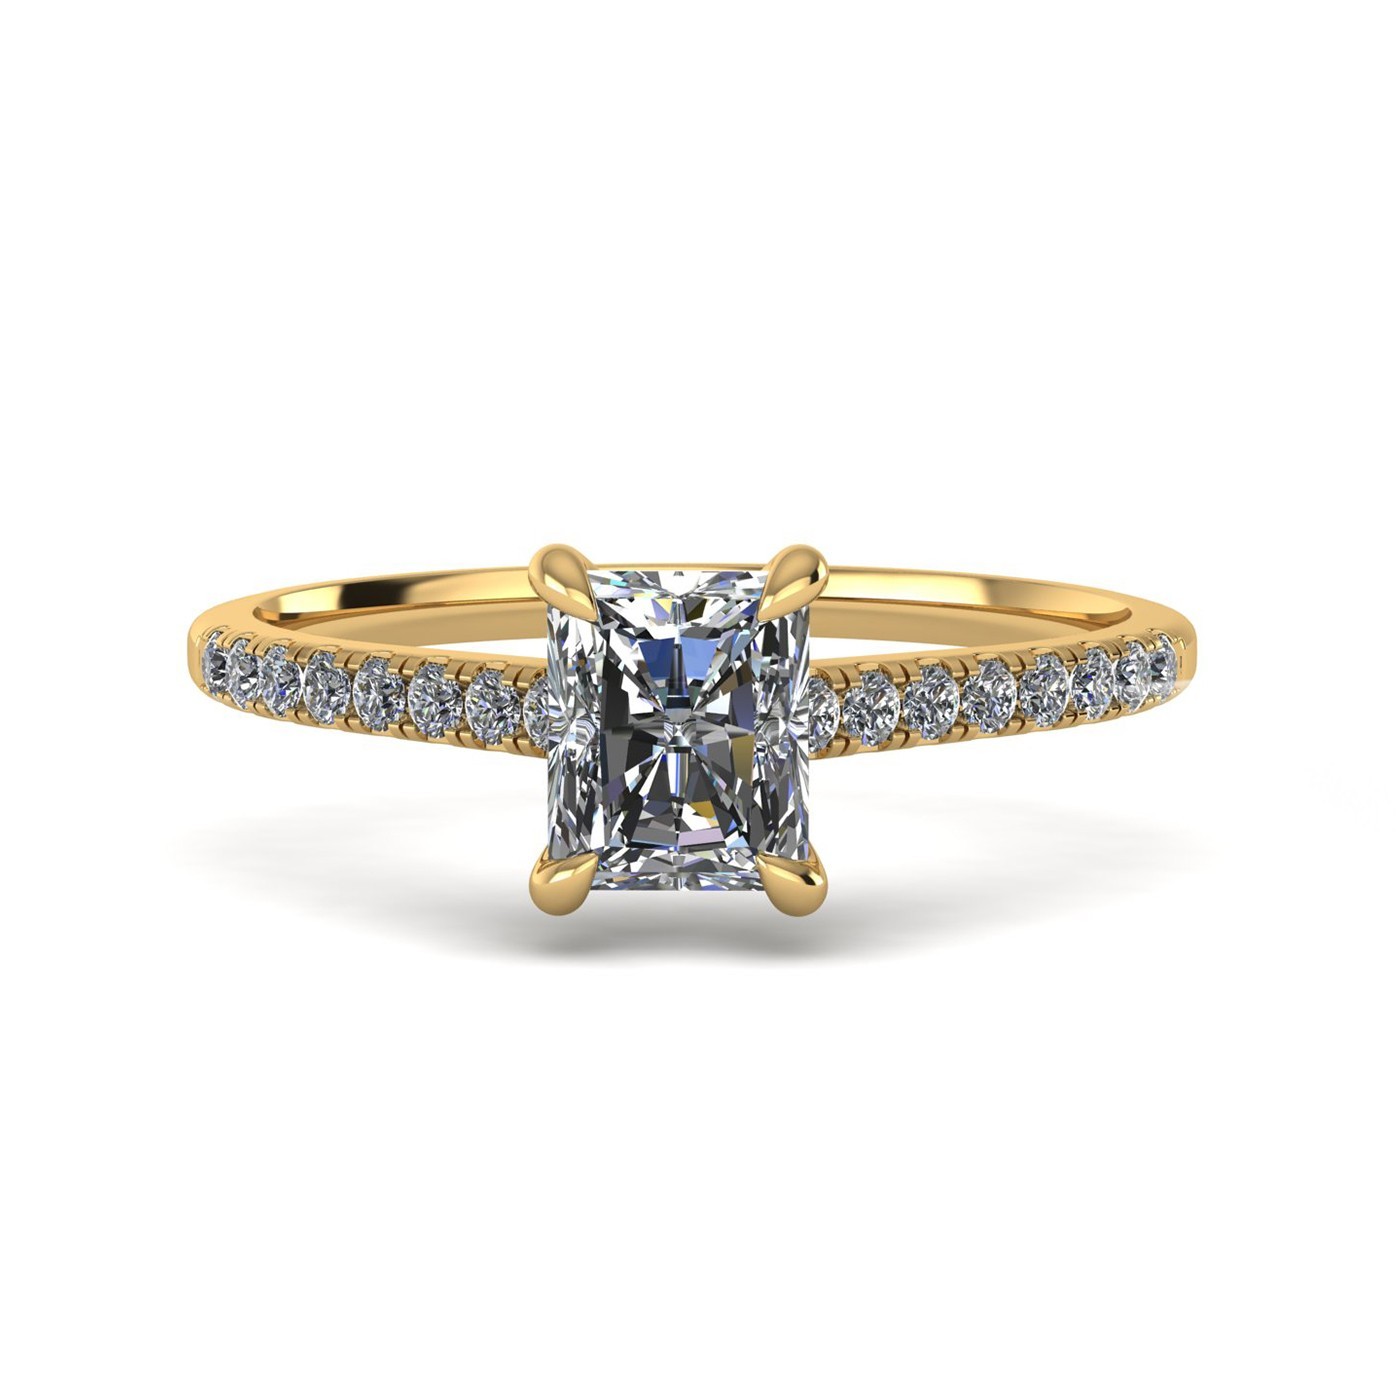 18k yellow gold  1,20 ct 4 prongs radiant cut diamond engagement ring with whisper thin pavÉ set band Photos & images